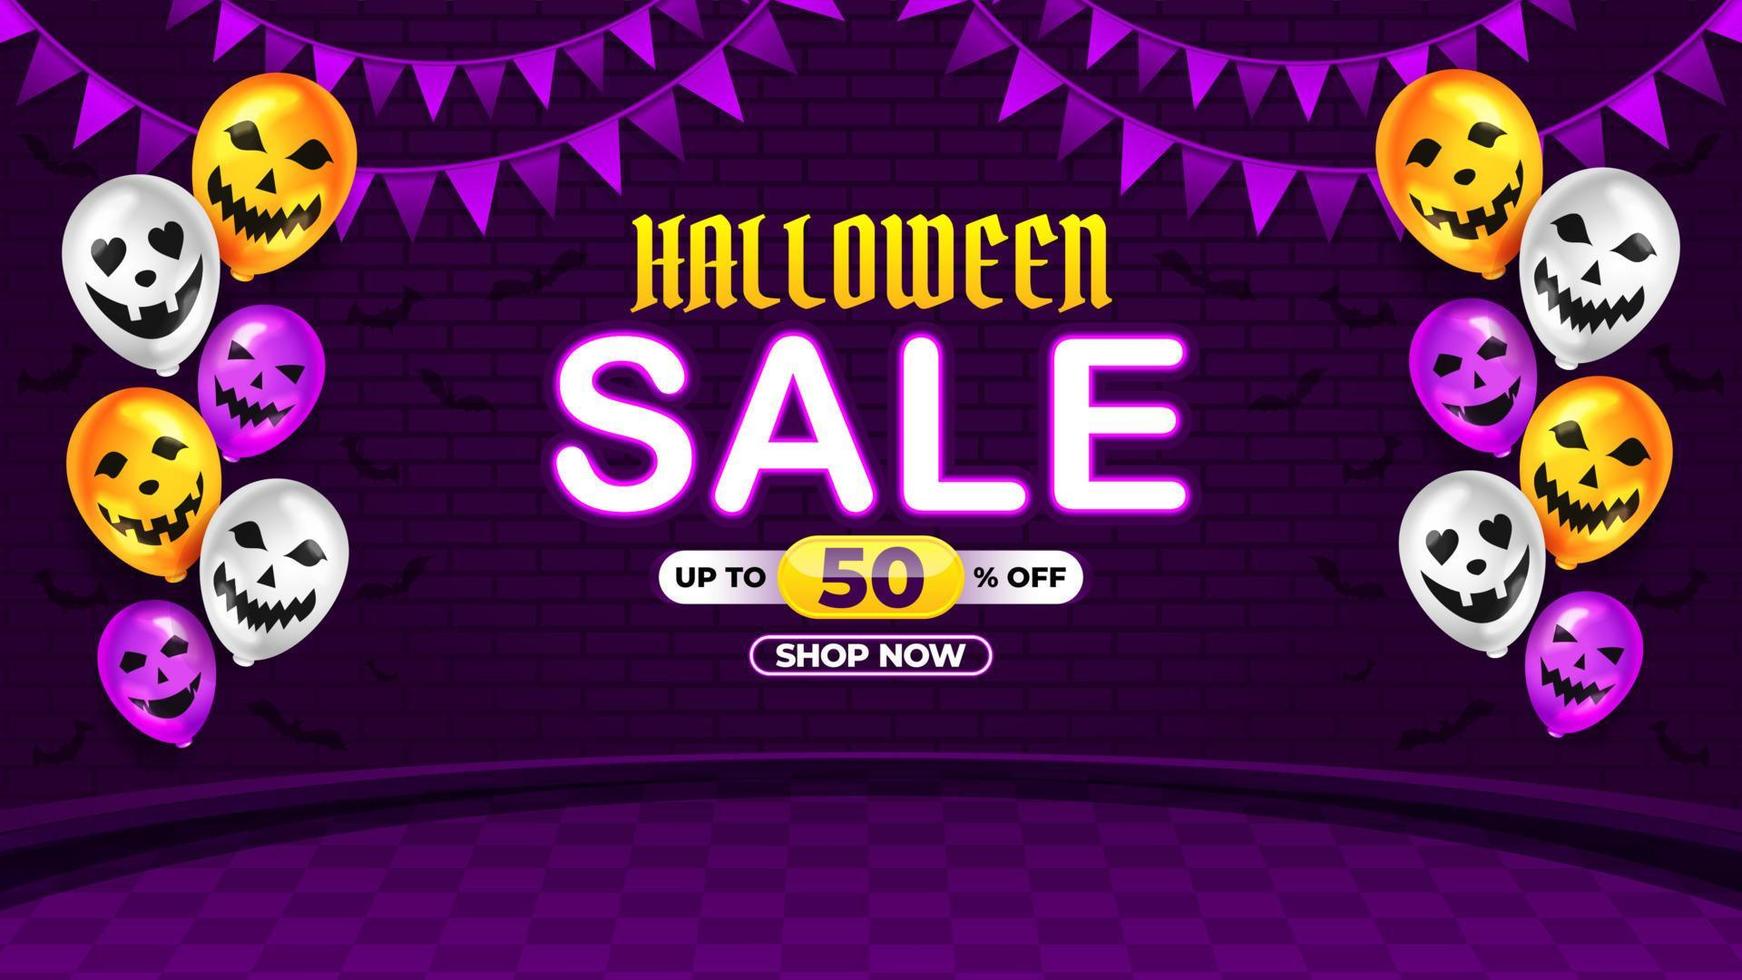 Halloween Sale Promotion with scary balloon and brick texture vector, happy halloween 2022 background for business retail promotion, banner, poster, social media, feed, invitation vector